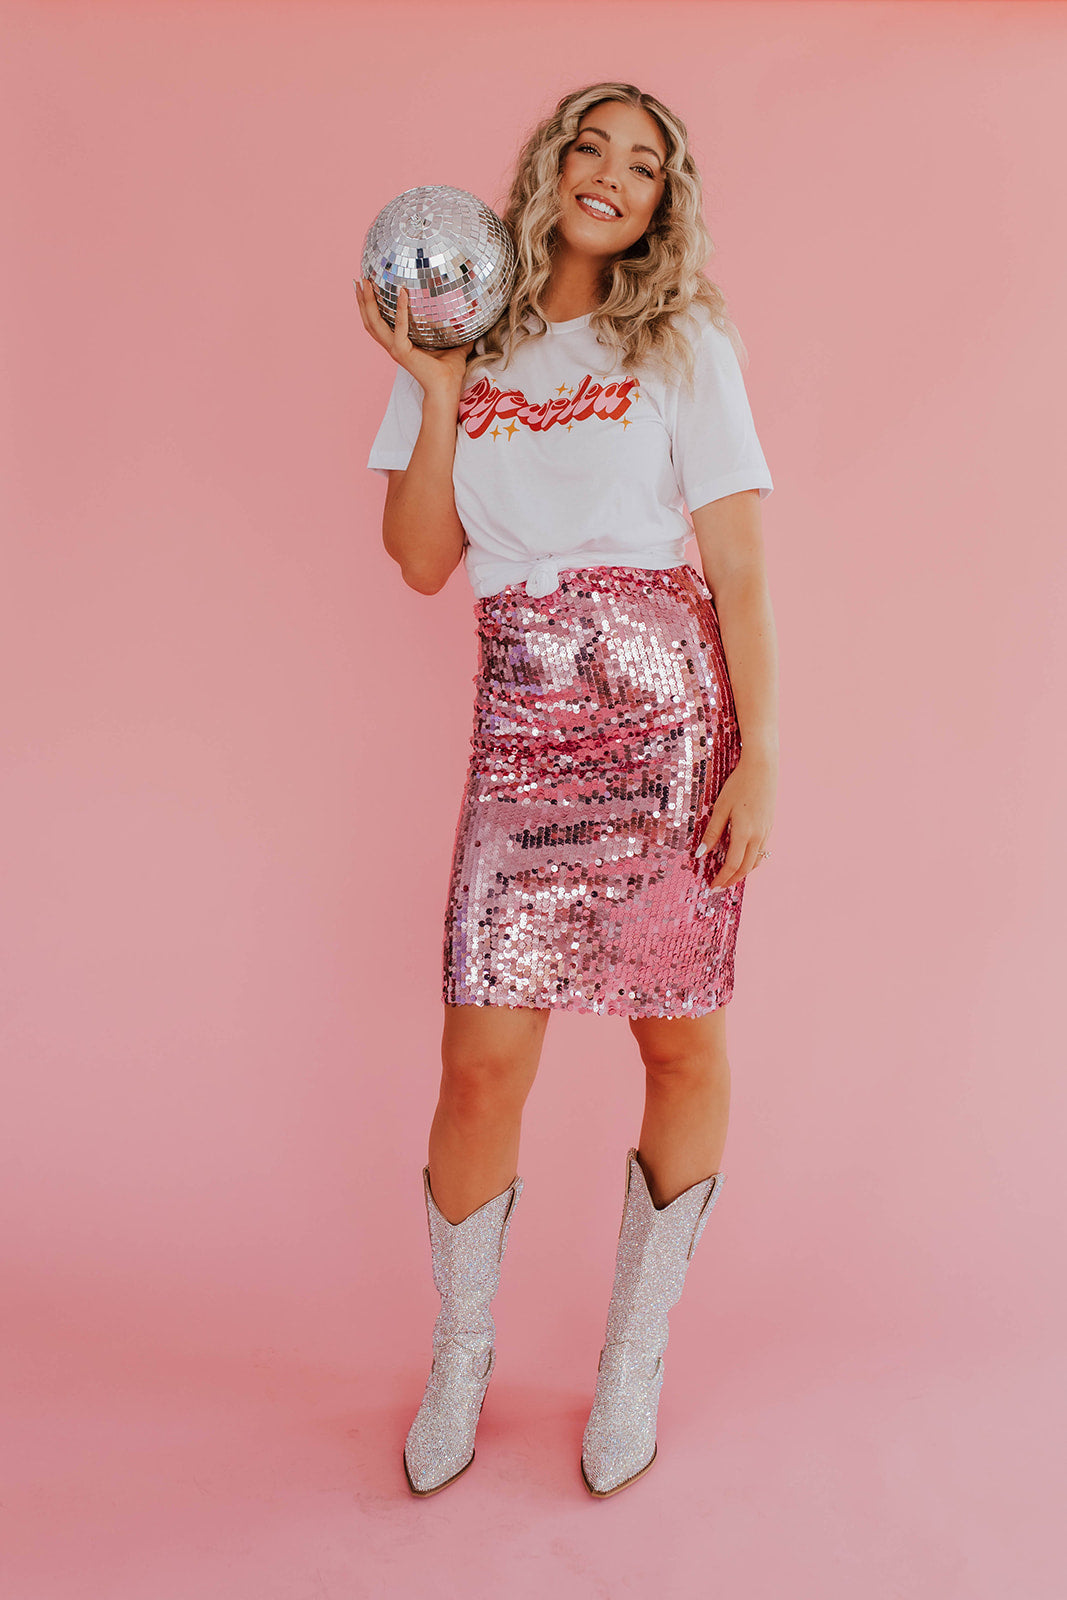 THE BEJEWELED TEE IN WHITE BY PINK DESERT